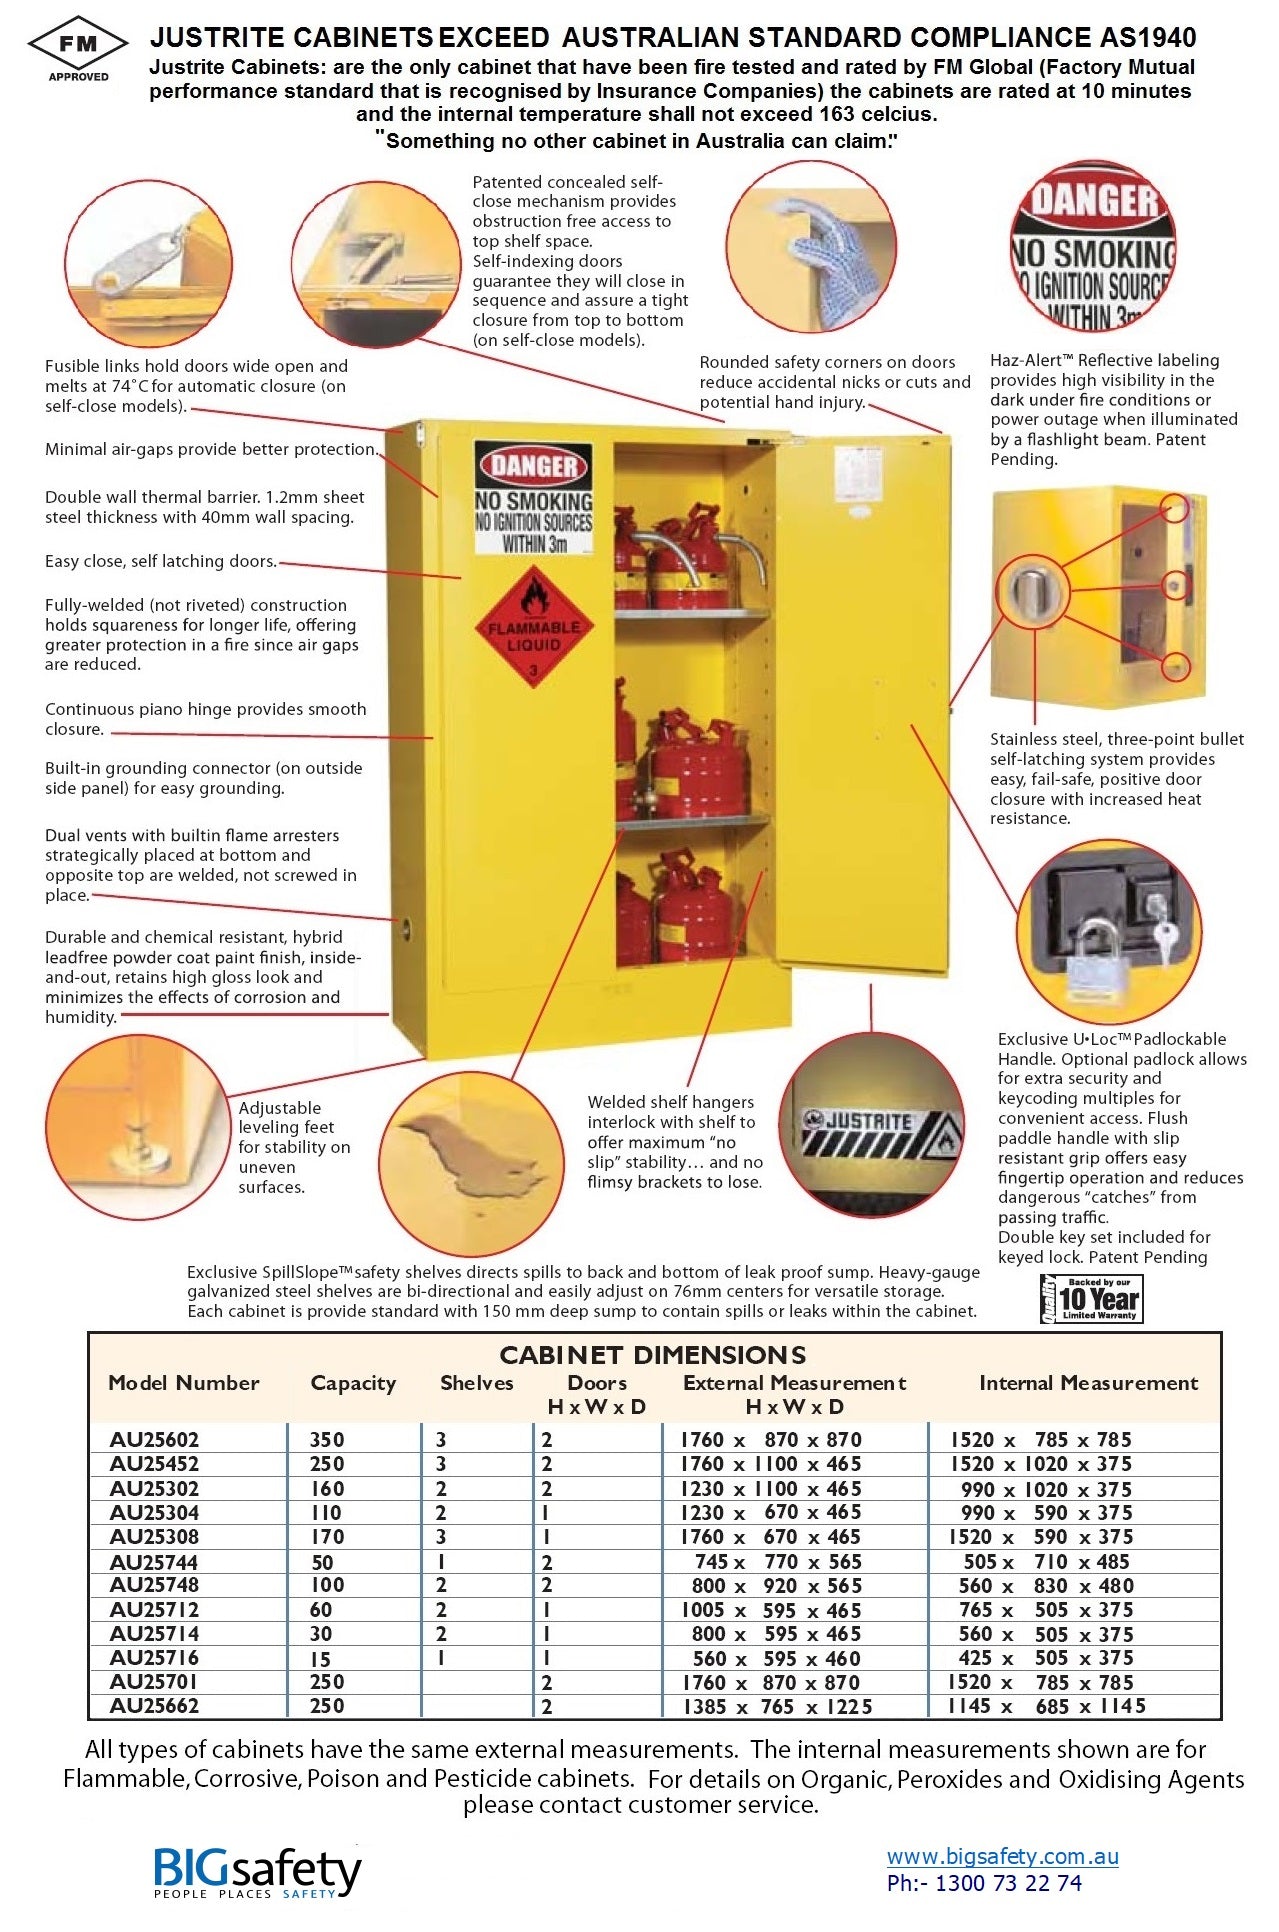 Justrite Flammable Goods Cabinet Features, benefits and Dimensions